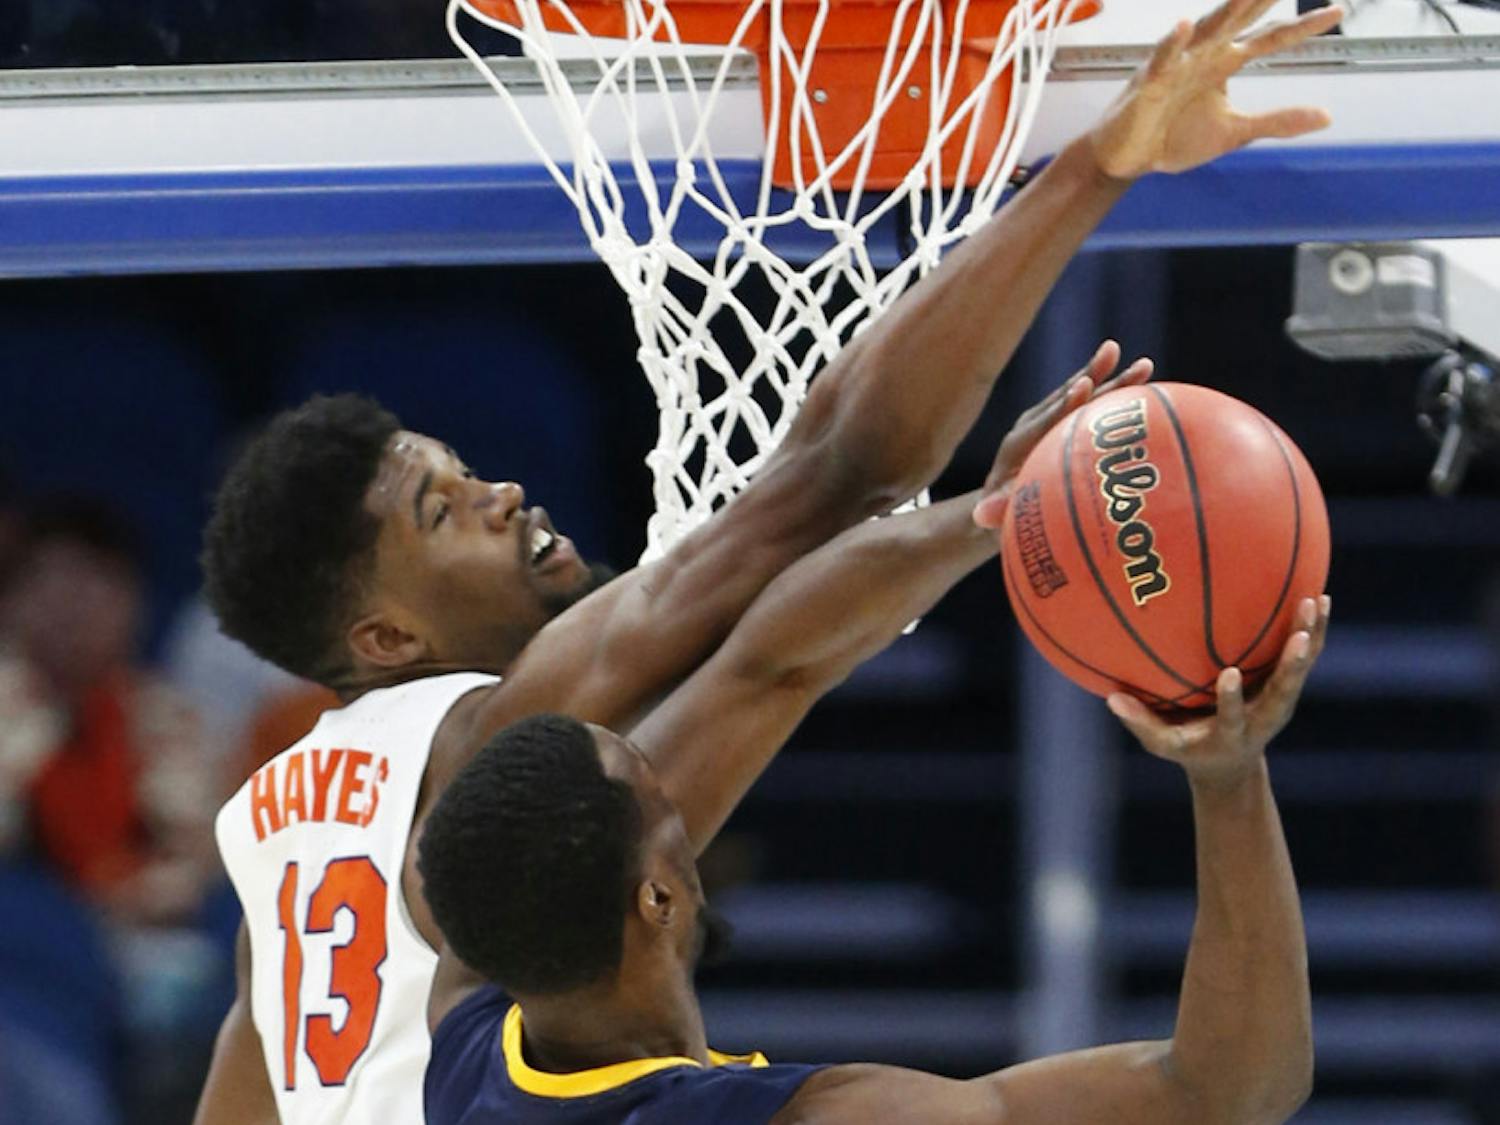 Florida forward Kevarrius Hayes (13) blocks a shot by East Tennessee State forward Tevin Glass (40) during the second half of the first round of the NCAA college basketball tournament, Thursday, March 16, 2017 in Orlando, Fla. Florida defeated ETSU 80-65. (AP Photo/Wilfredo Lee)